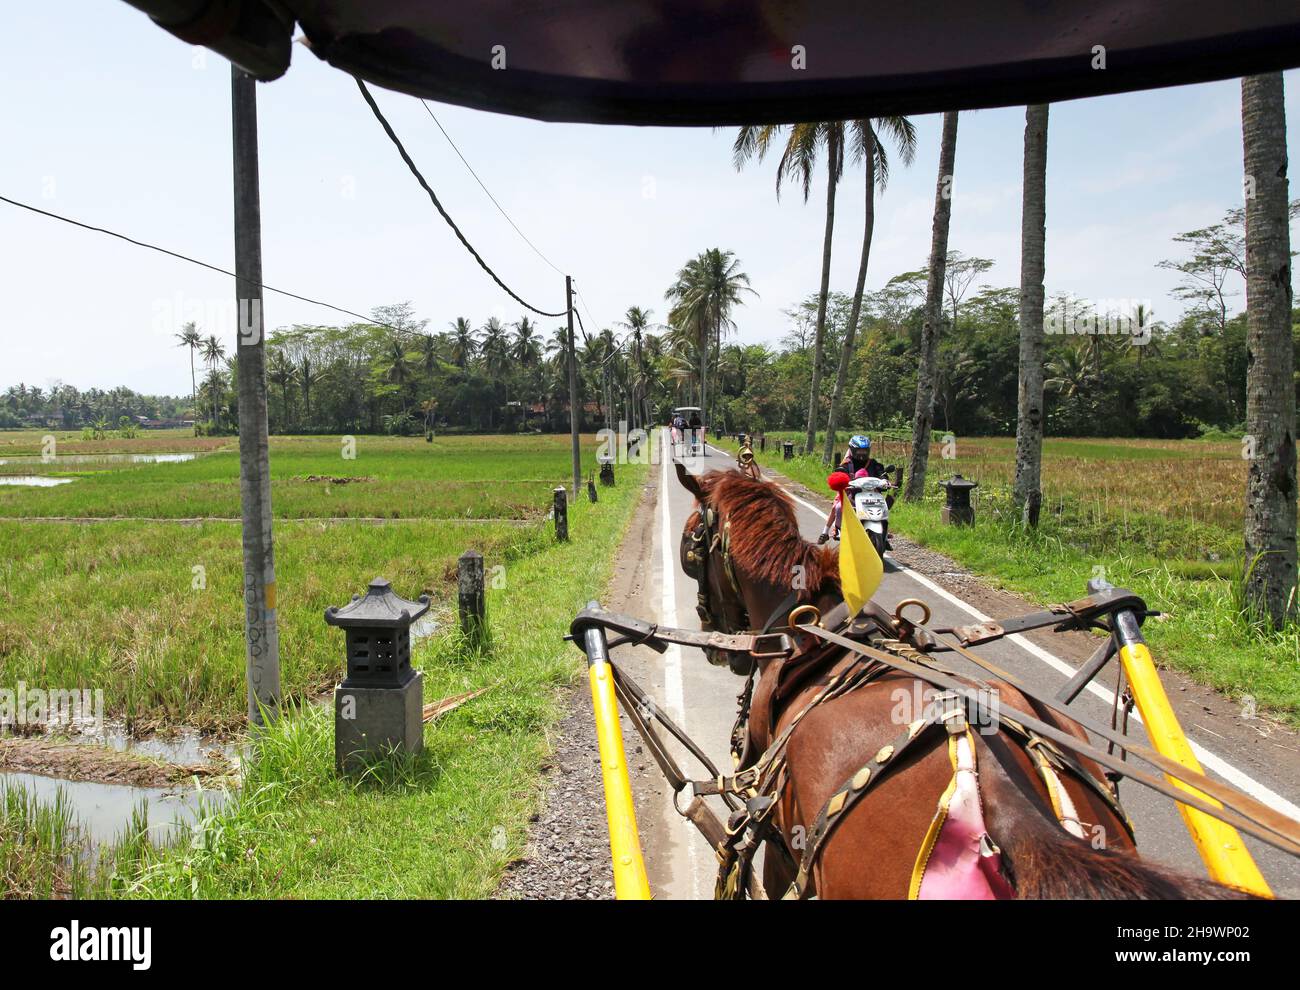 riding in a traditional horse and cart or Delman in the countryside near Borobudur temple in Magelang, Central Java, Indonesia. Stock Photo